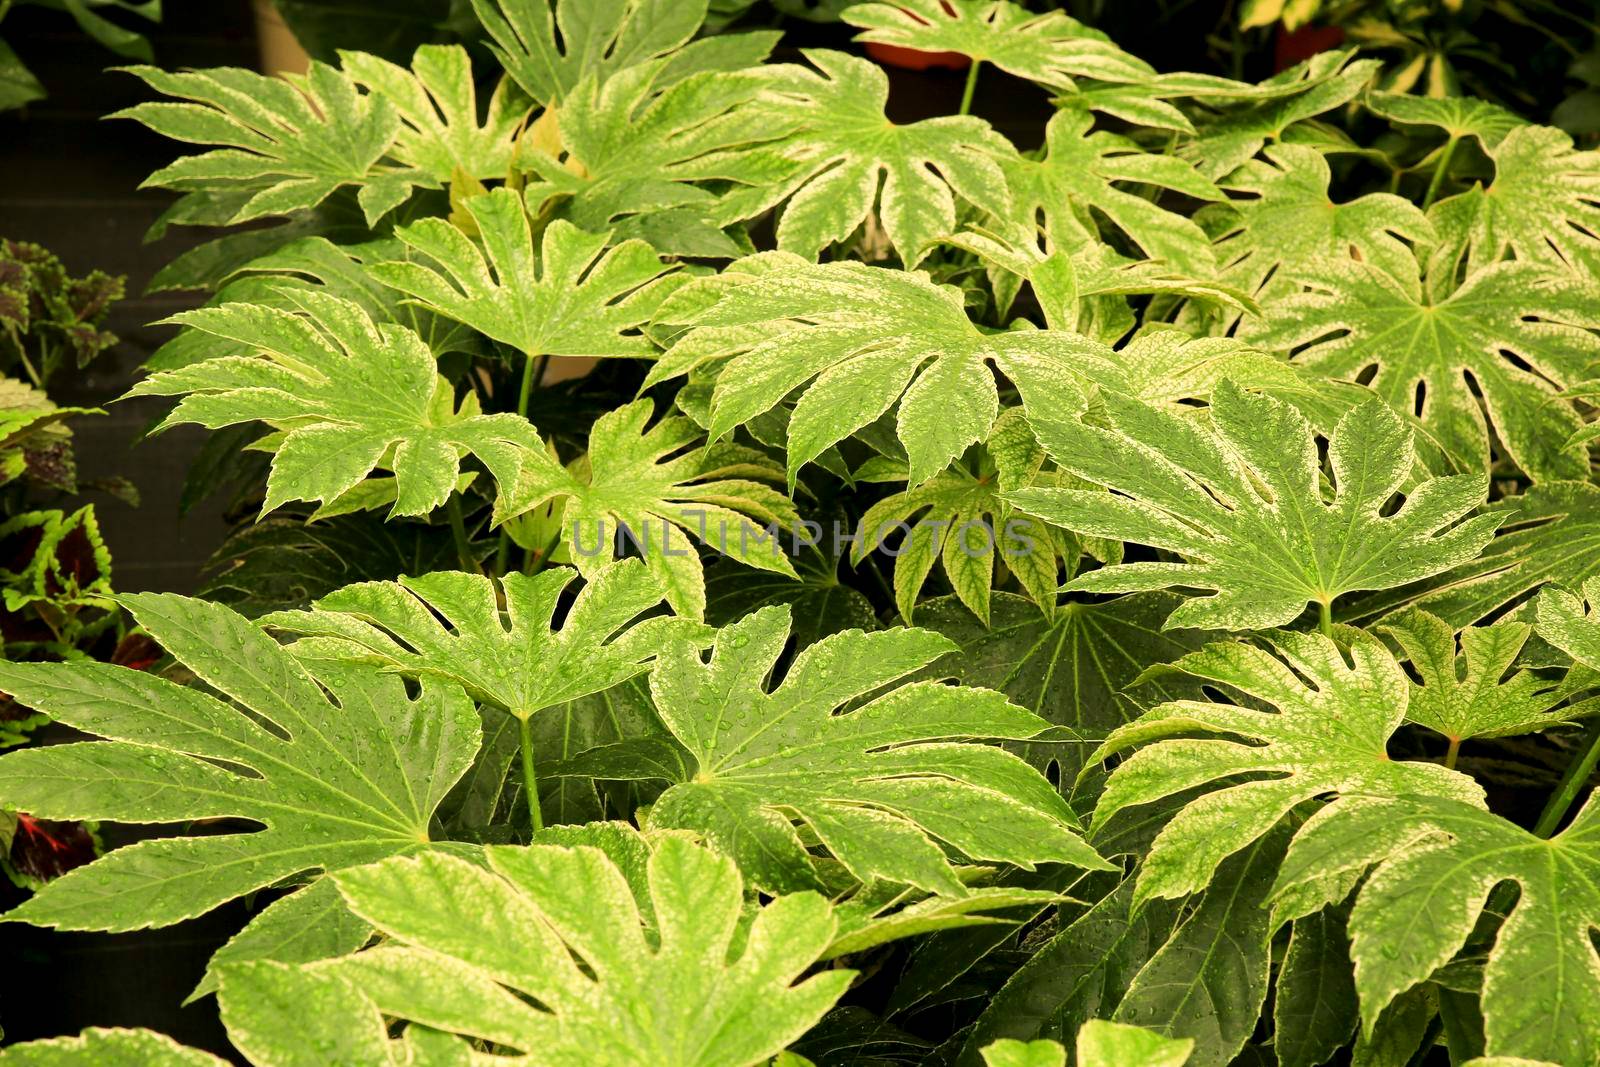 Beautiful and colorful Aralia Spider plants in the garden